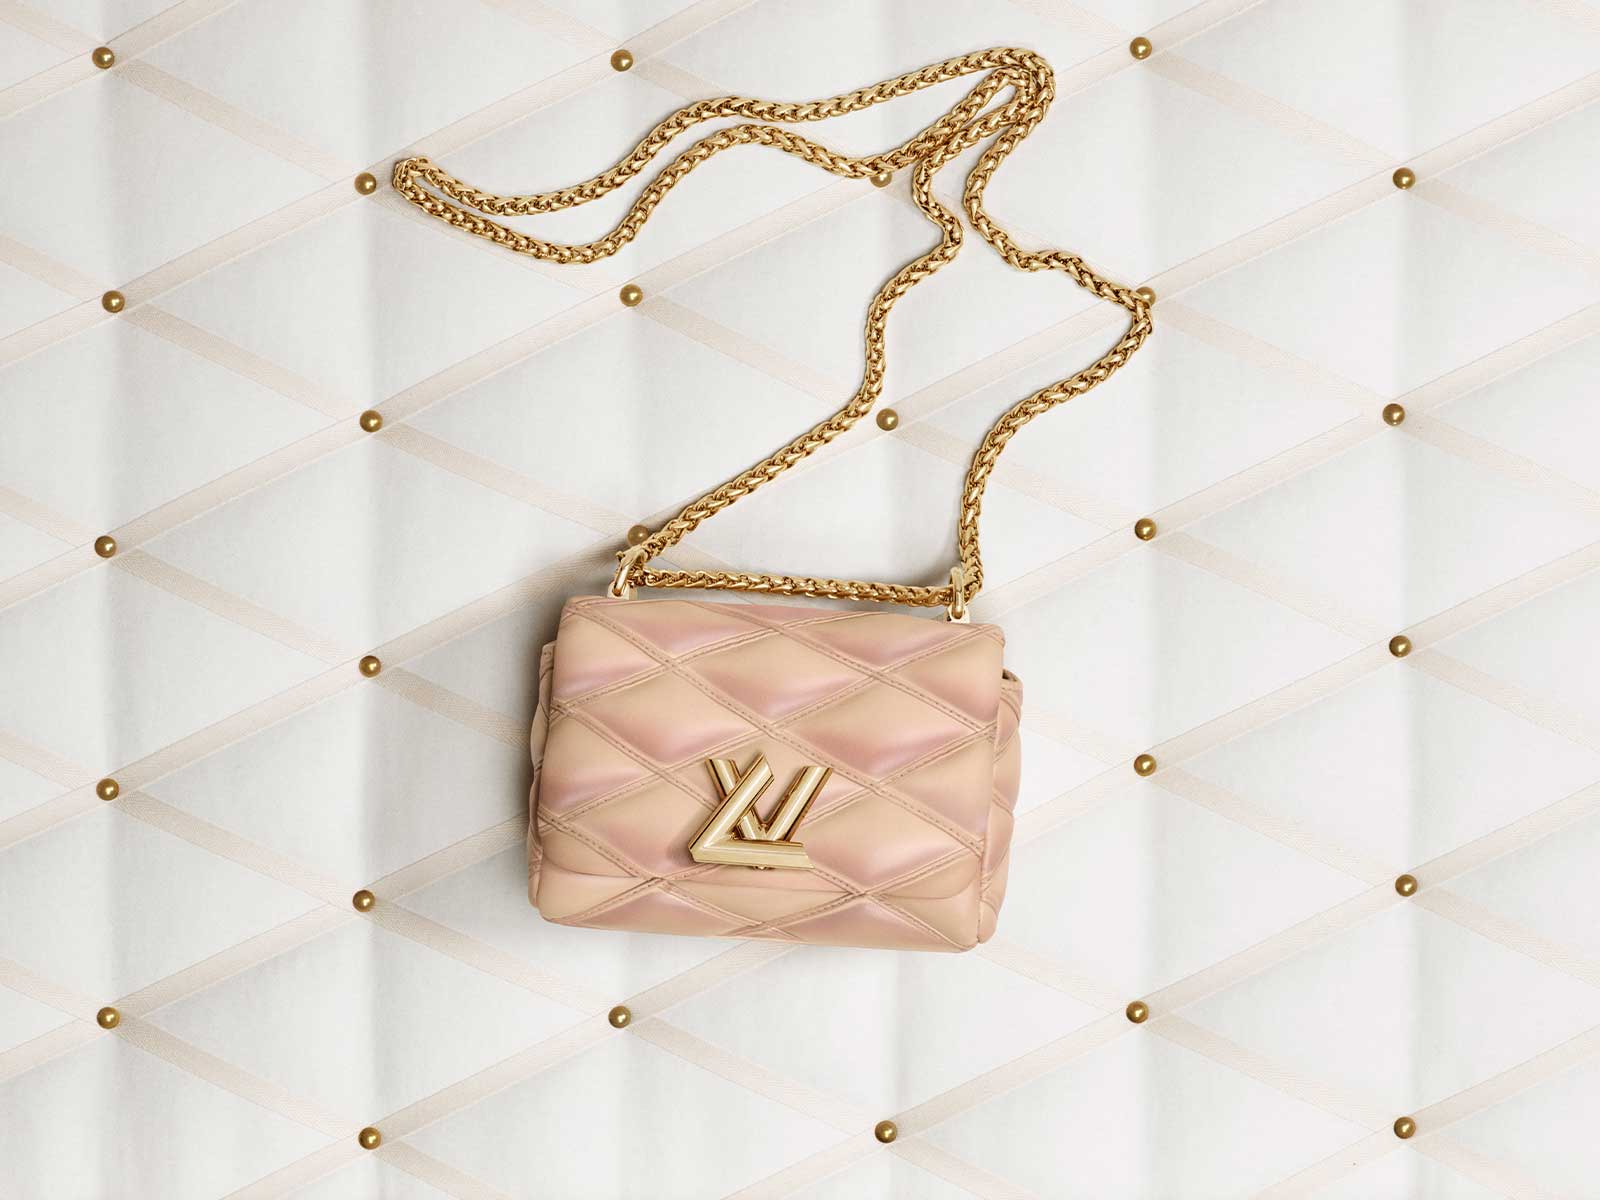 Louis Vuitton Launches New Iconic Handbag, the GO-14: A